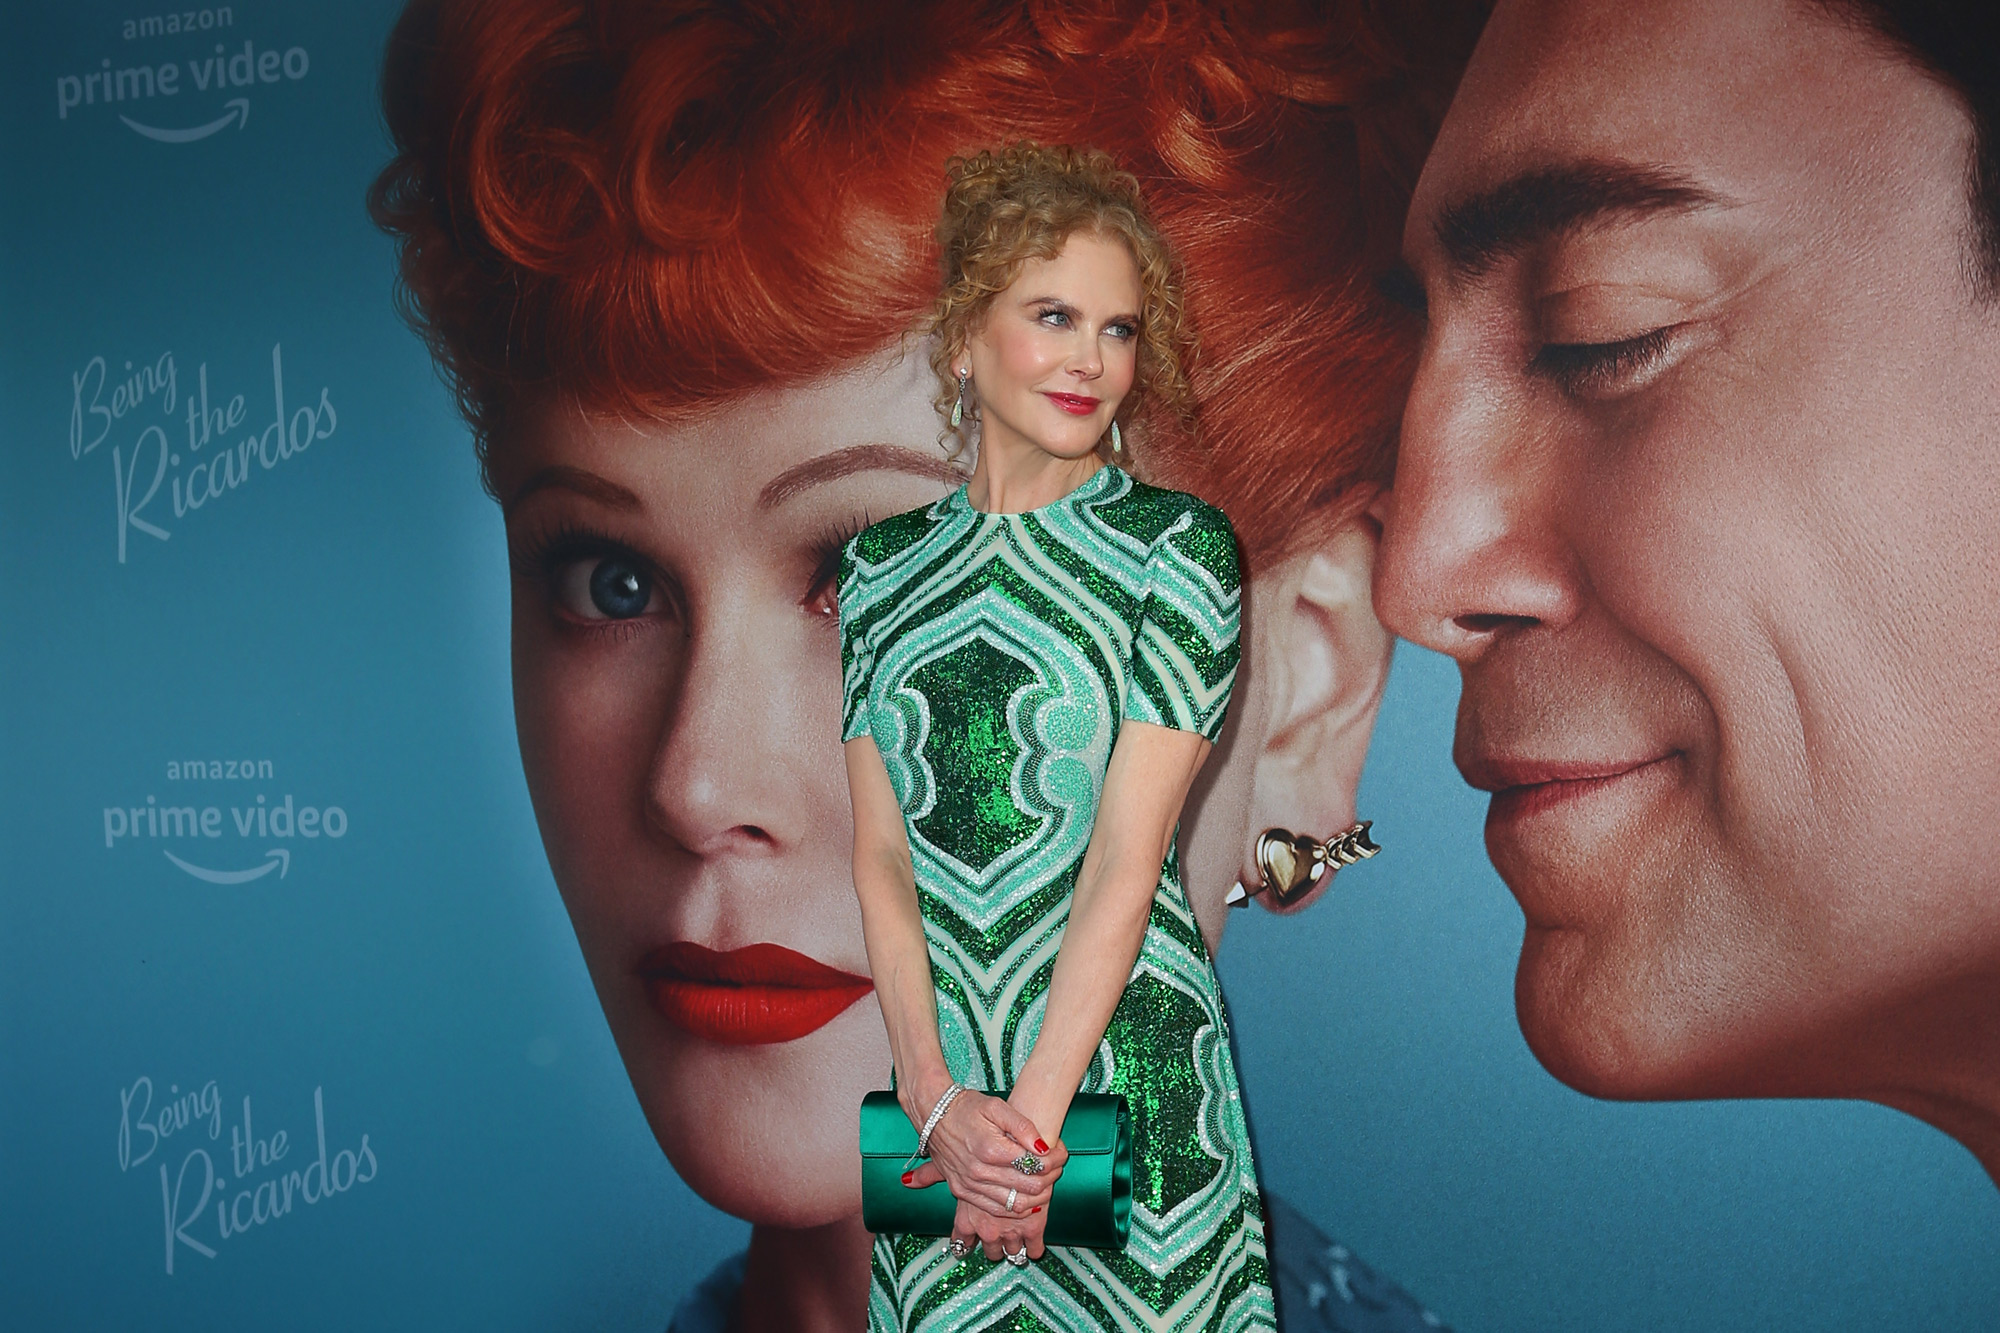 Nicole Kidman attends the Australian premiere of "Being the Ricardos" at the Hayden Orpheum Picture Palace on December 15, 2021 in Sydney.